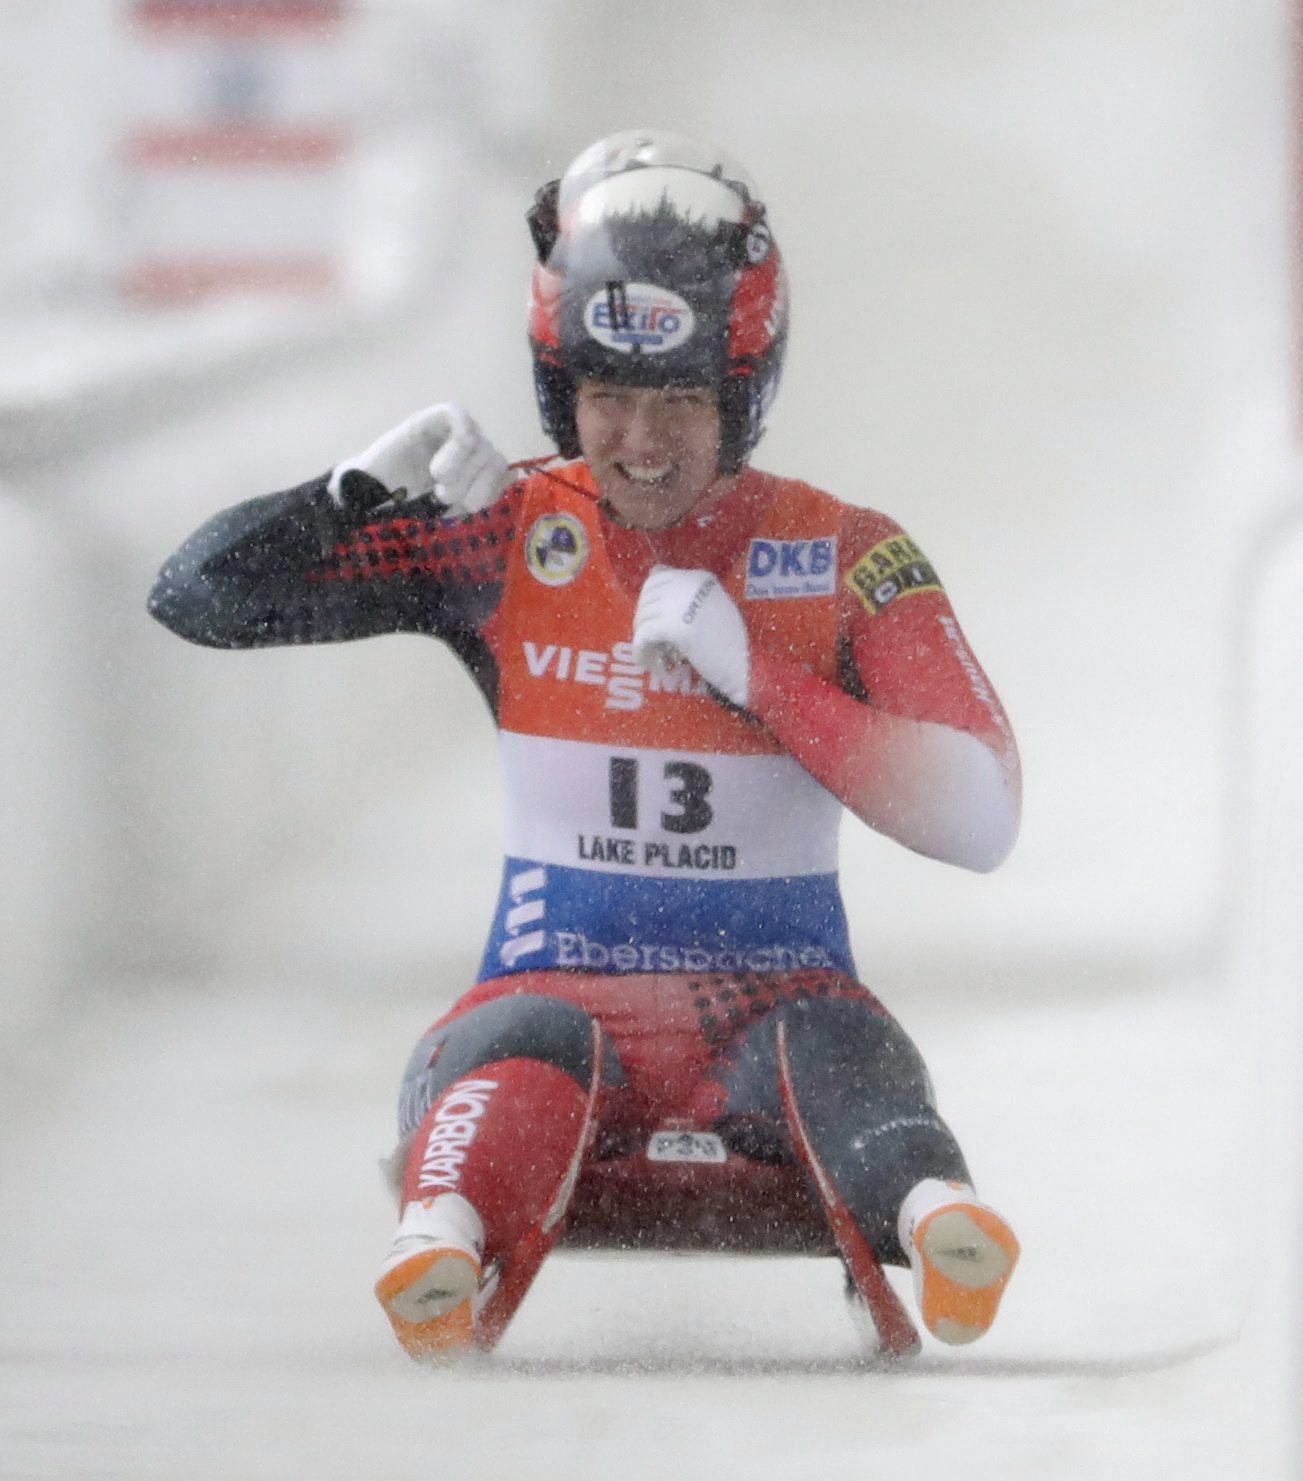 Alex Gough, of Canada, celebrates her third place finish in the women's luge World Cup race on Saturday, Dec. 3, 2016, in Lake Placid, N.Y. (AP Photo/Mike Groll)